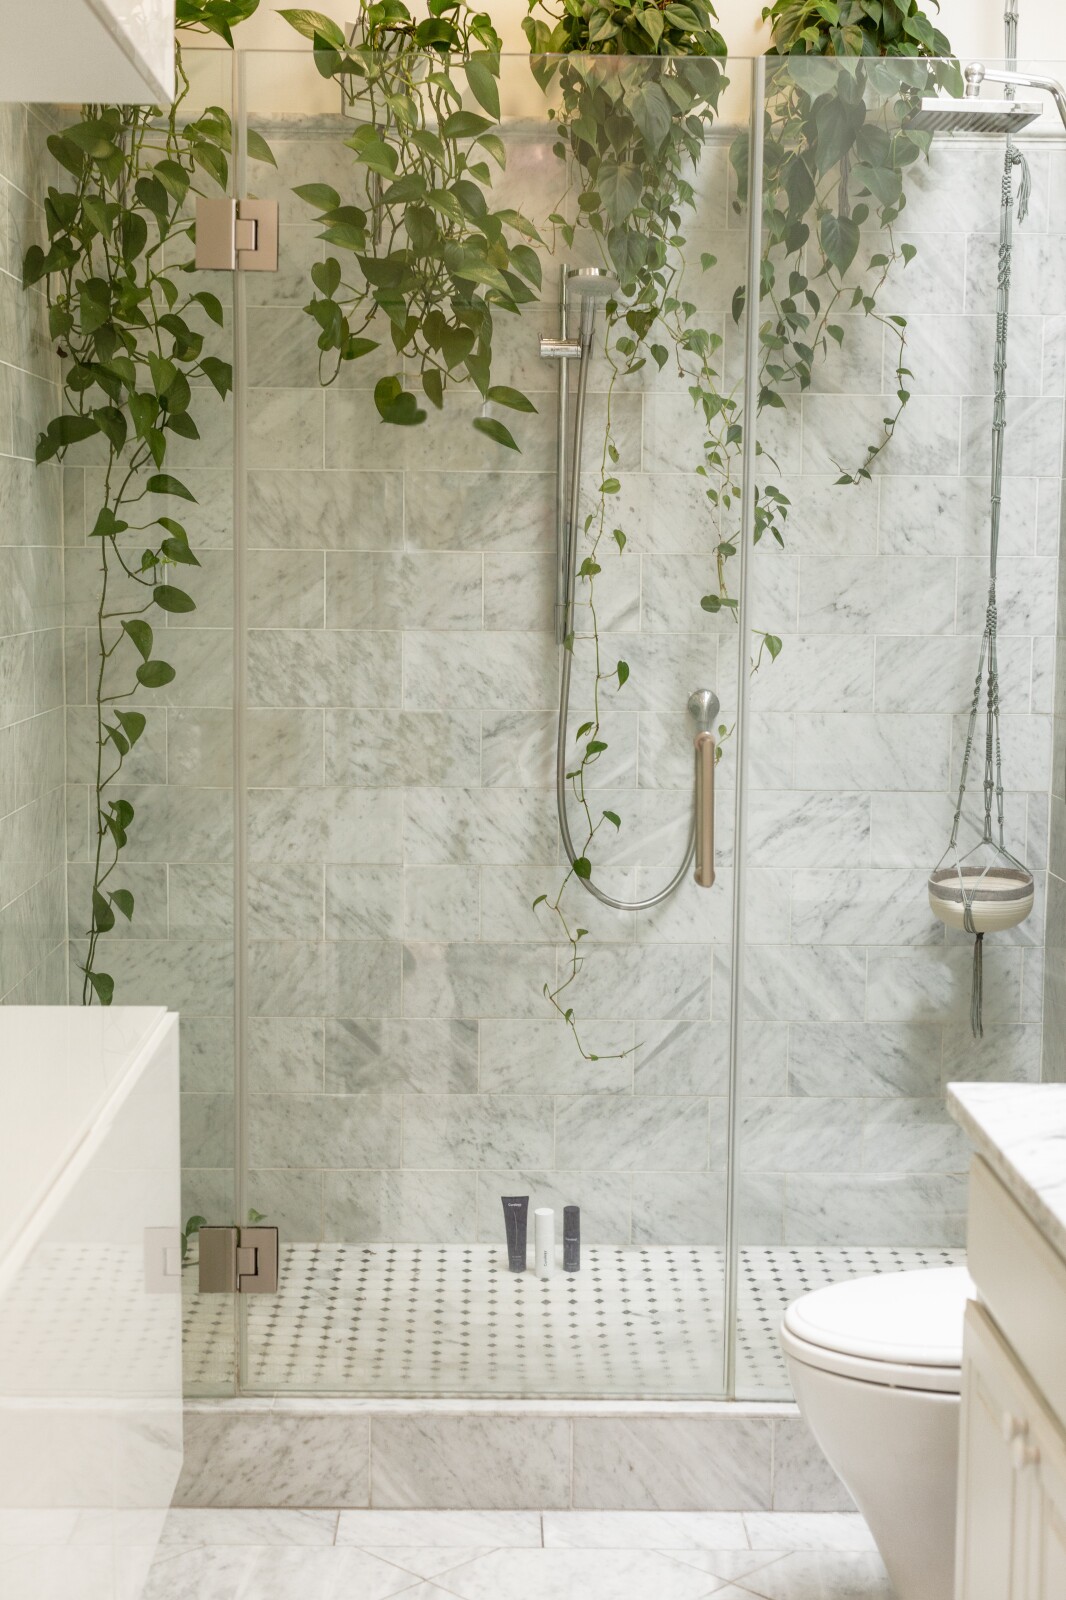 Product Lifestyle image of a shower enclosure featuring hanging foliage